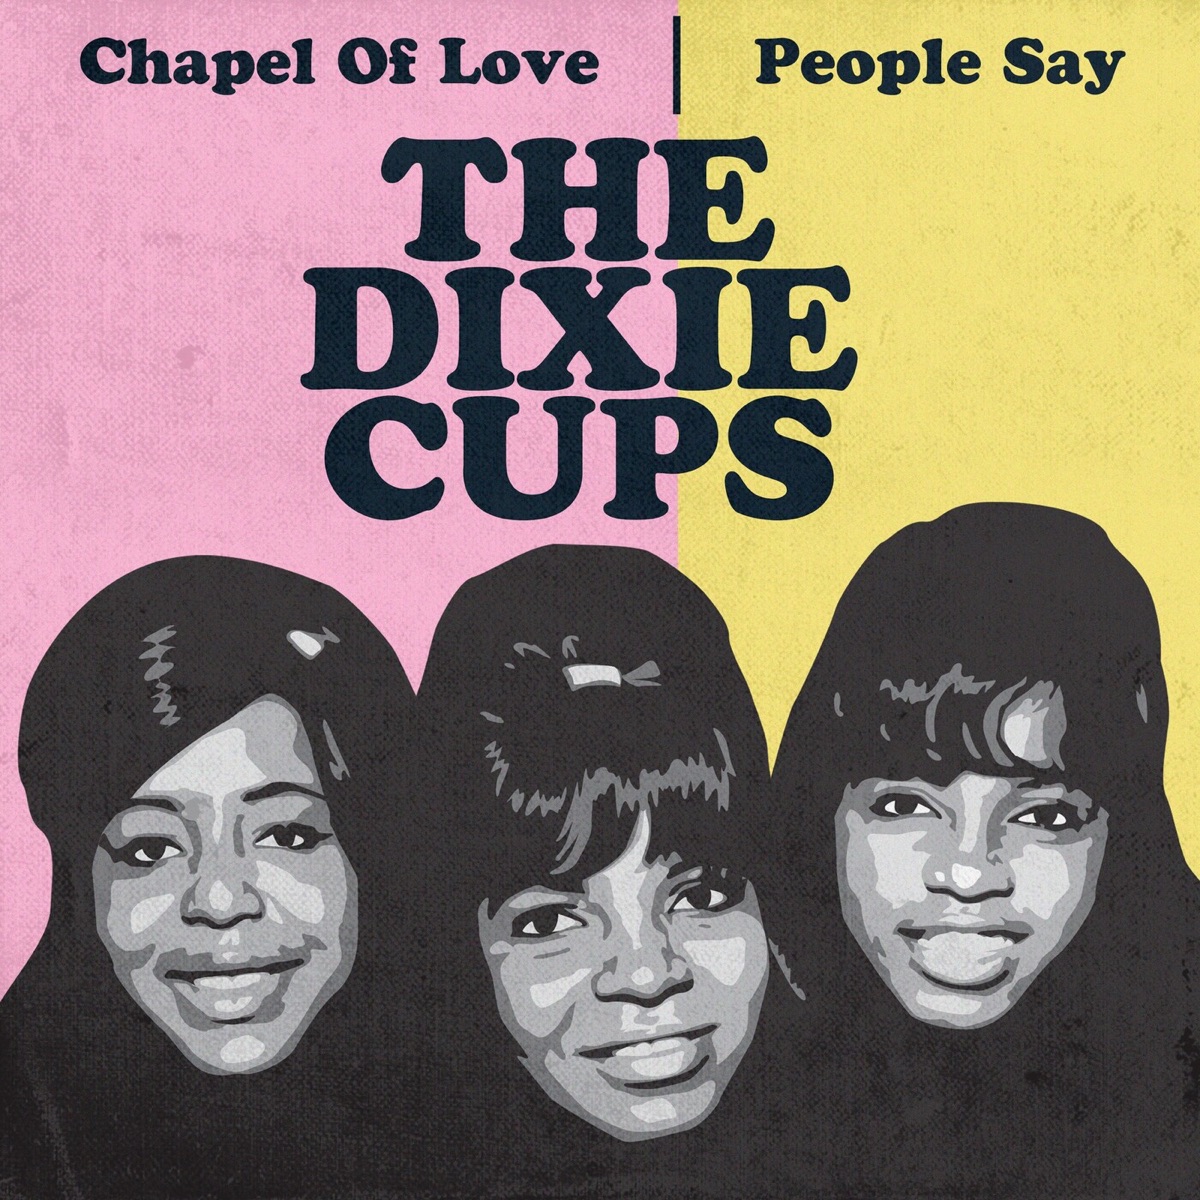 The Dixie Cups and 'Chapel of Love' - WSJ